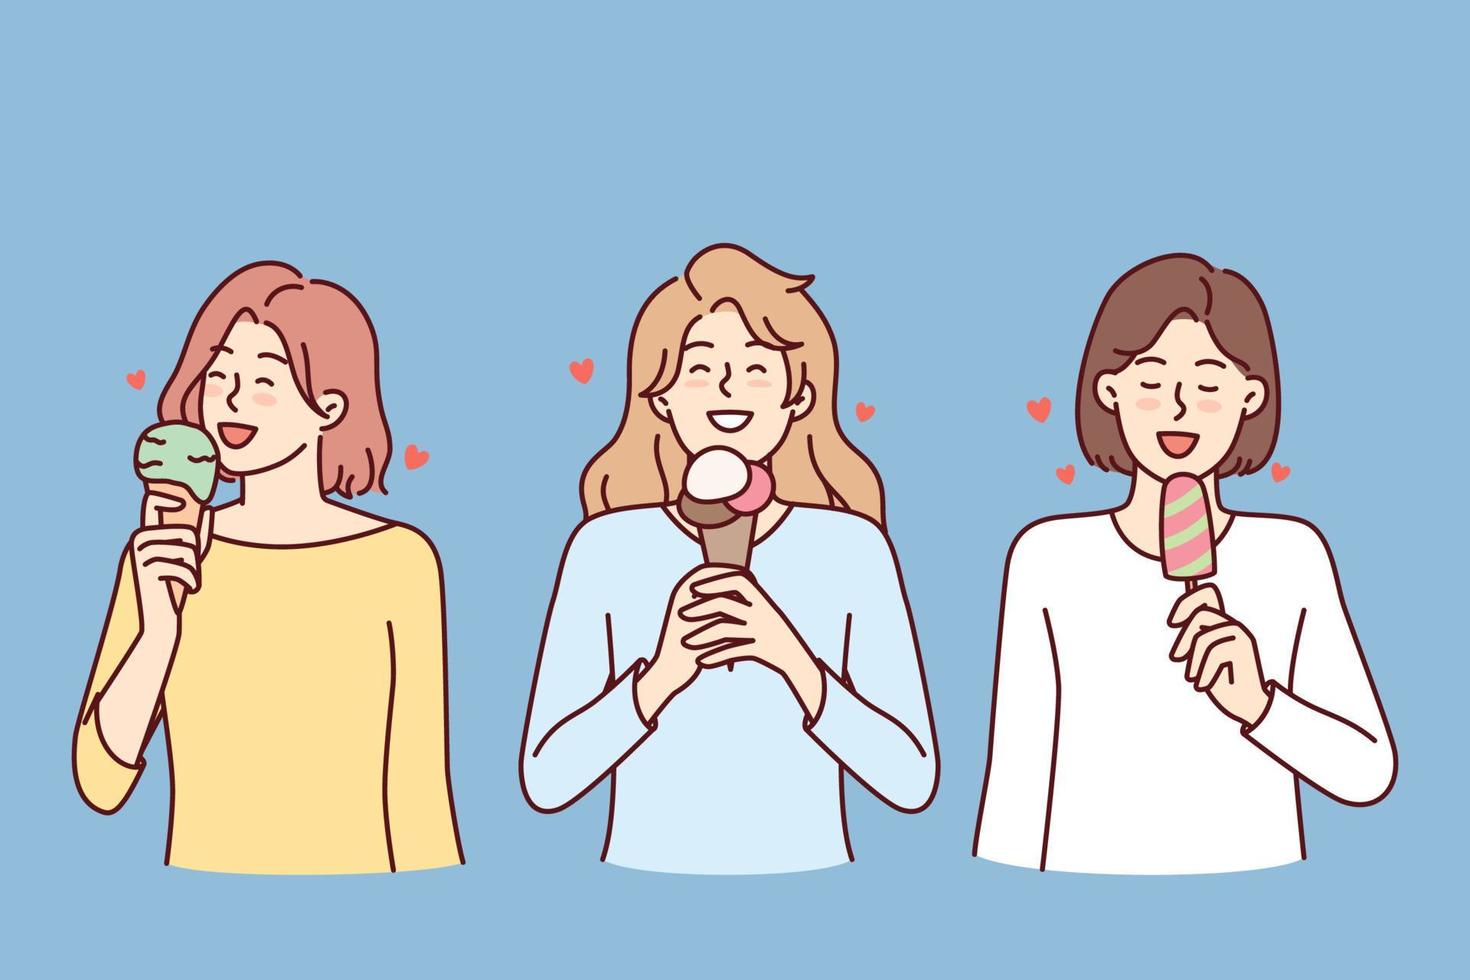 Girls eat ice cream to cool down during summer walk or satisfy their hunger with street food. Three women with cold ice cream enjoy sweet taste of popsicles on stick or in waffle cone vector